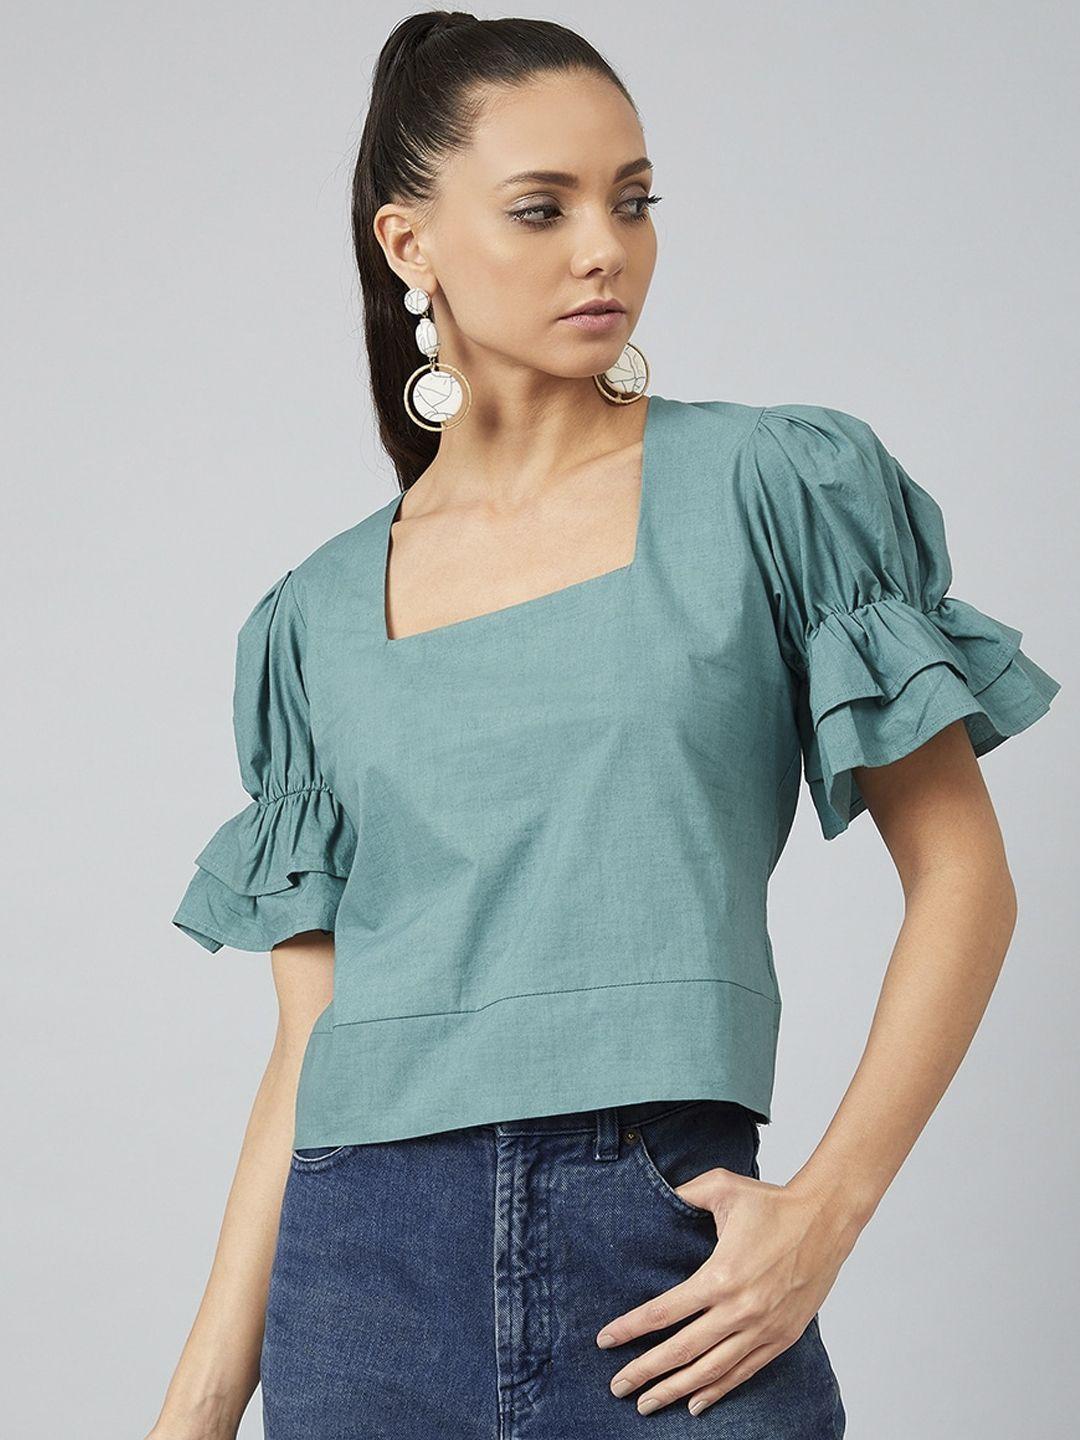 athena women teal blue solid top